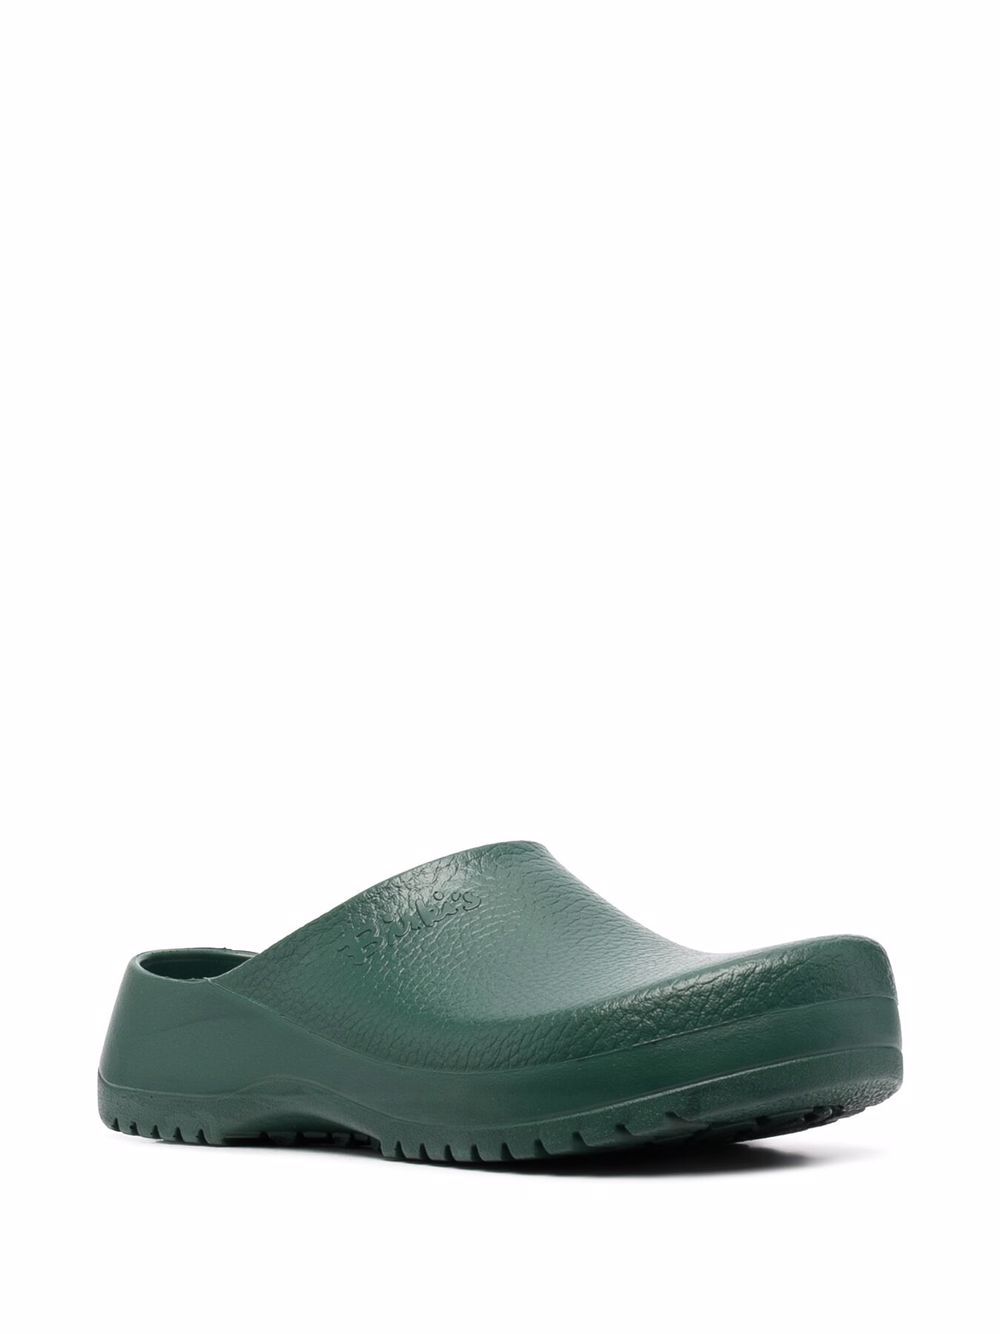 Shop Birkenstock slip-on clog slippers with Express Delivery - FARFETCH